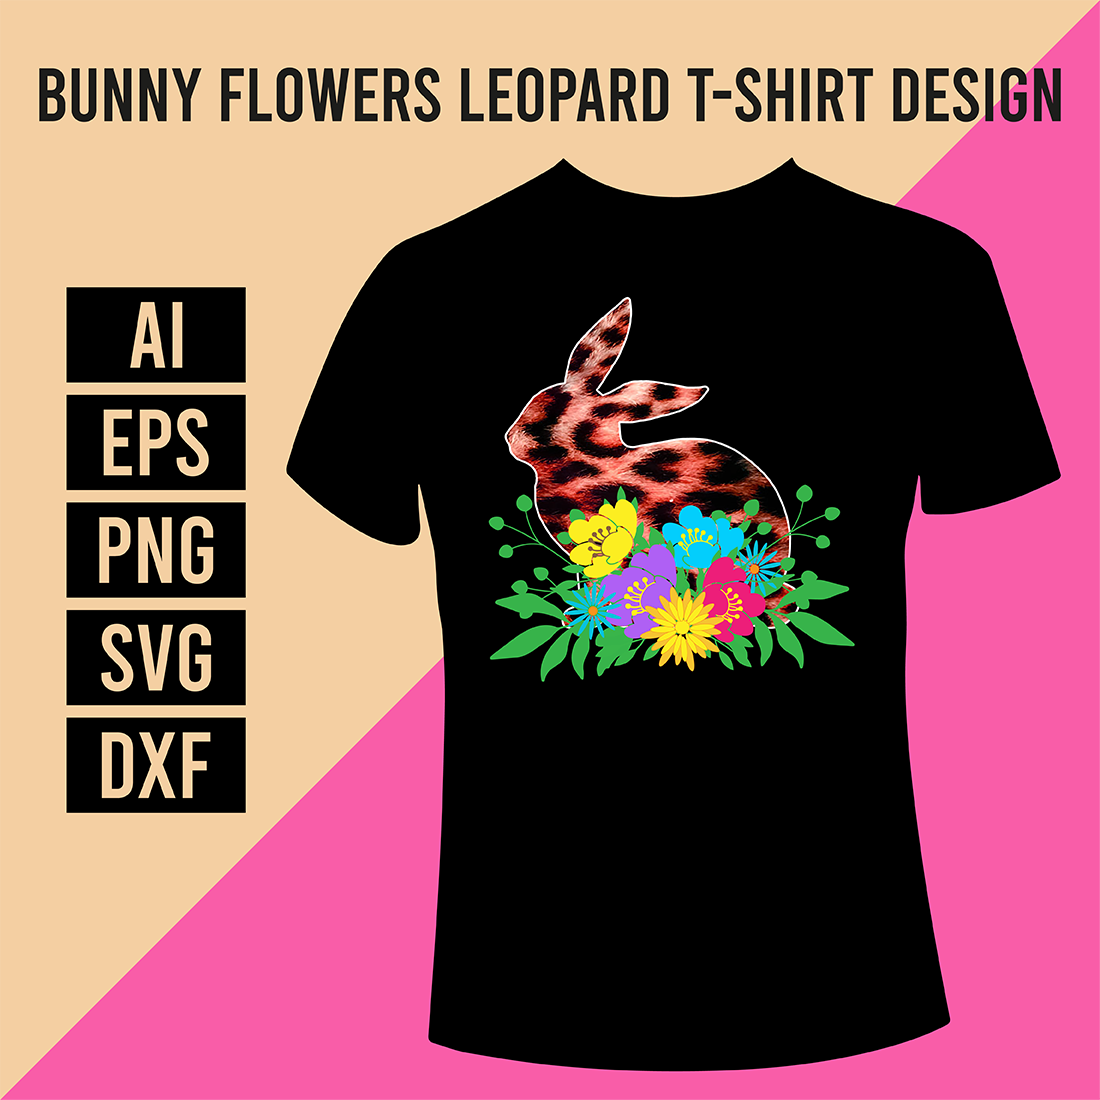 Black t - shirt with a colorful bunny on it.